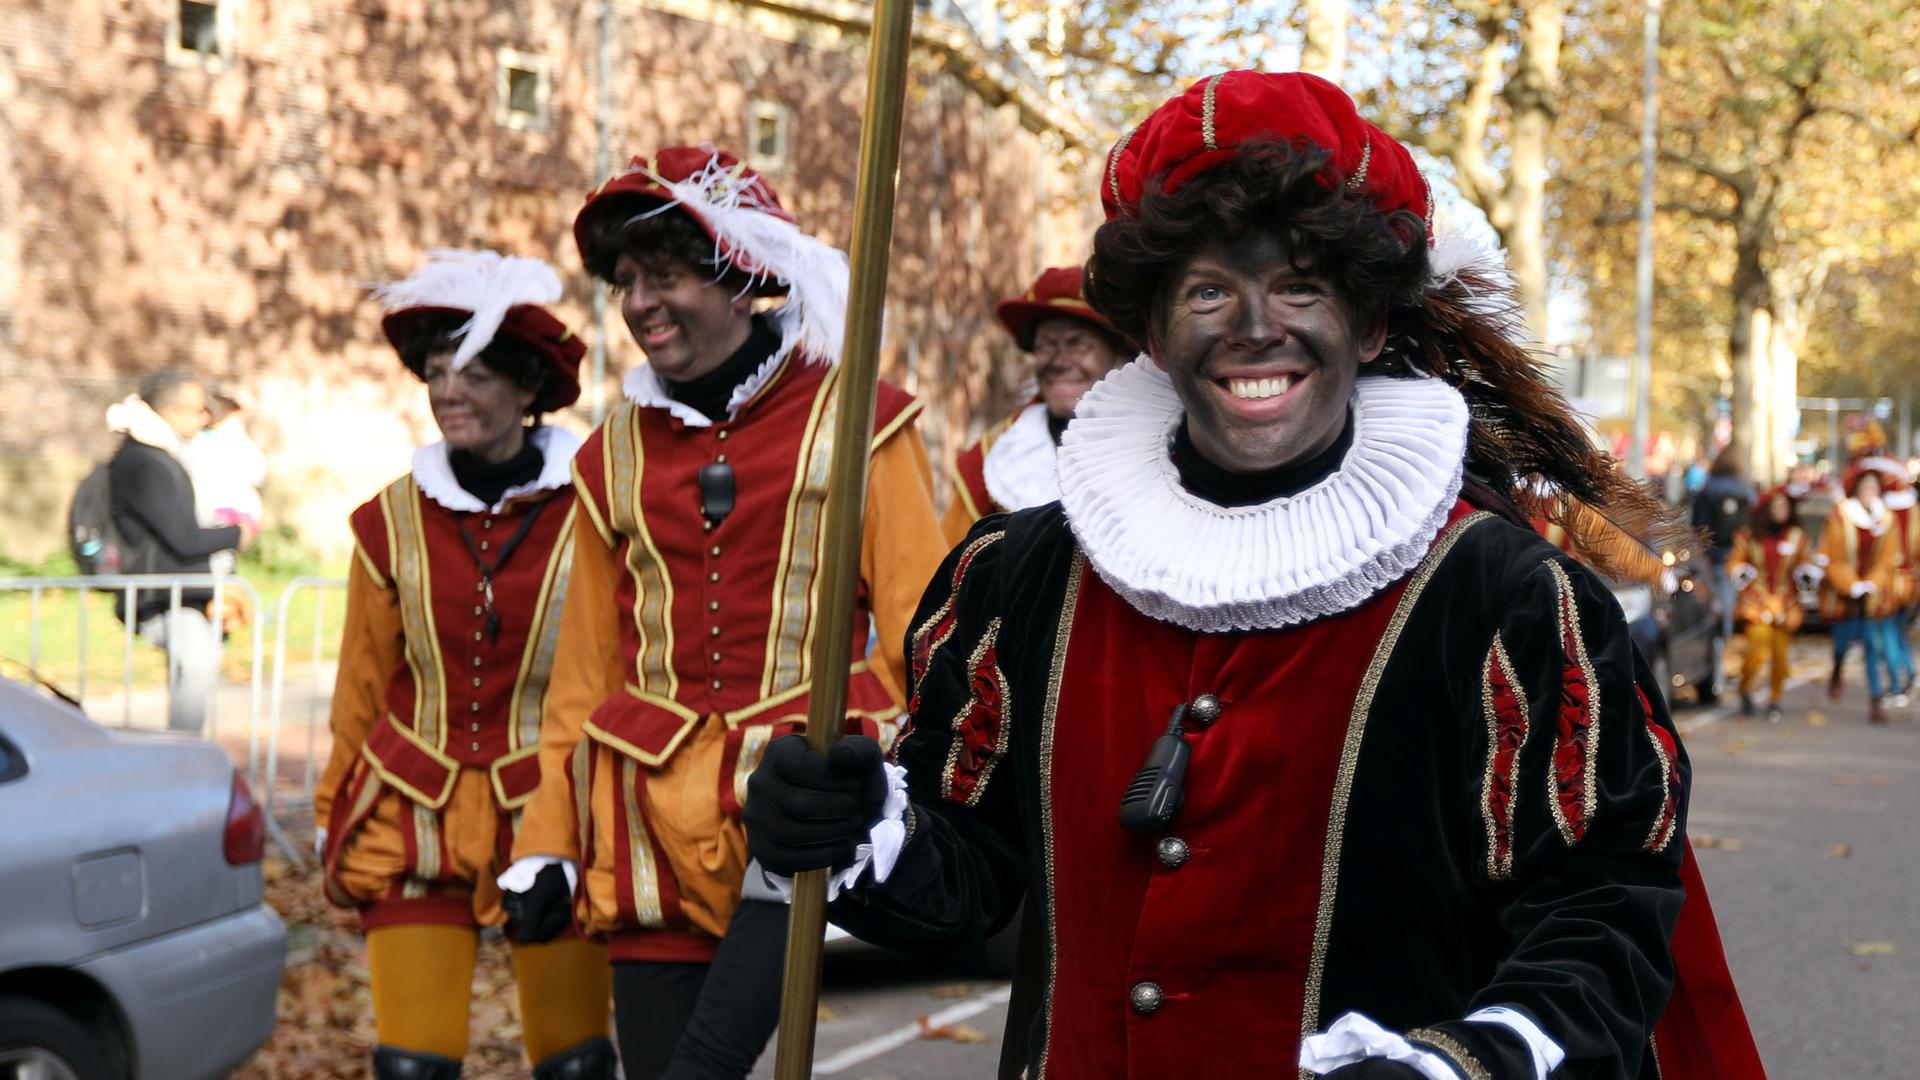 Parade participants in Amsterdam, Netherlands, are shown in jester attire and in blackface.